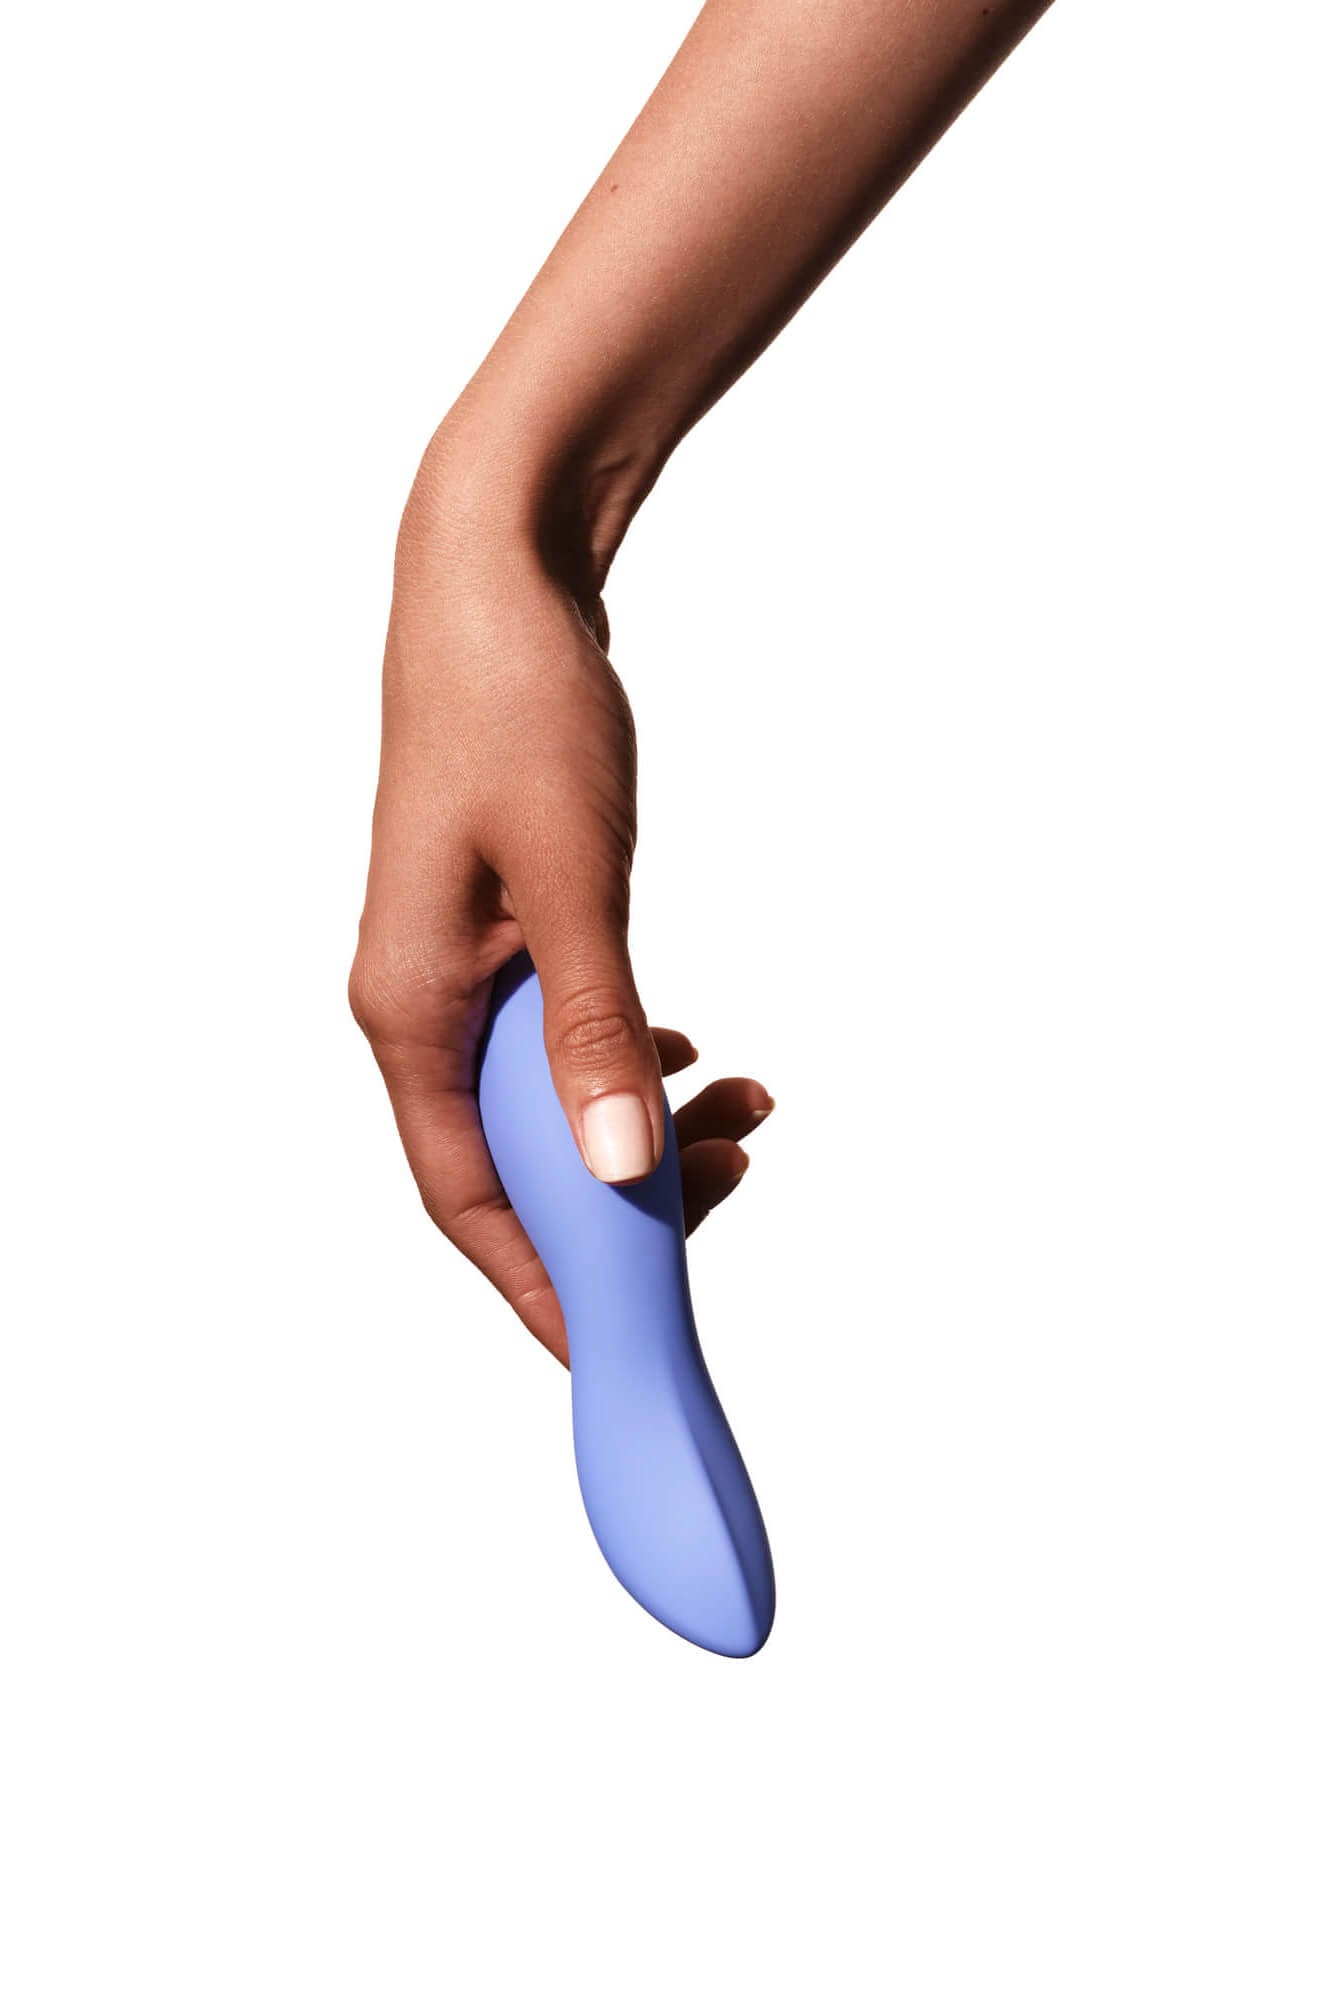 Periwinkle | Light blue vibrator being held by hand upside down on a beige background